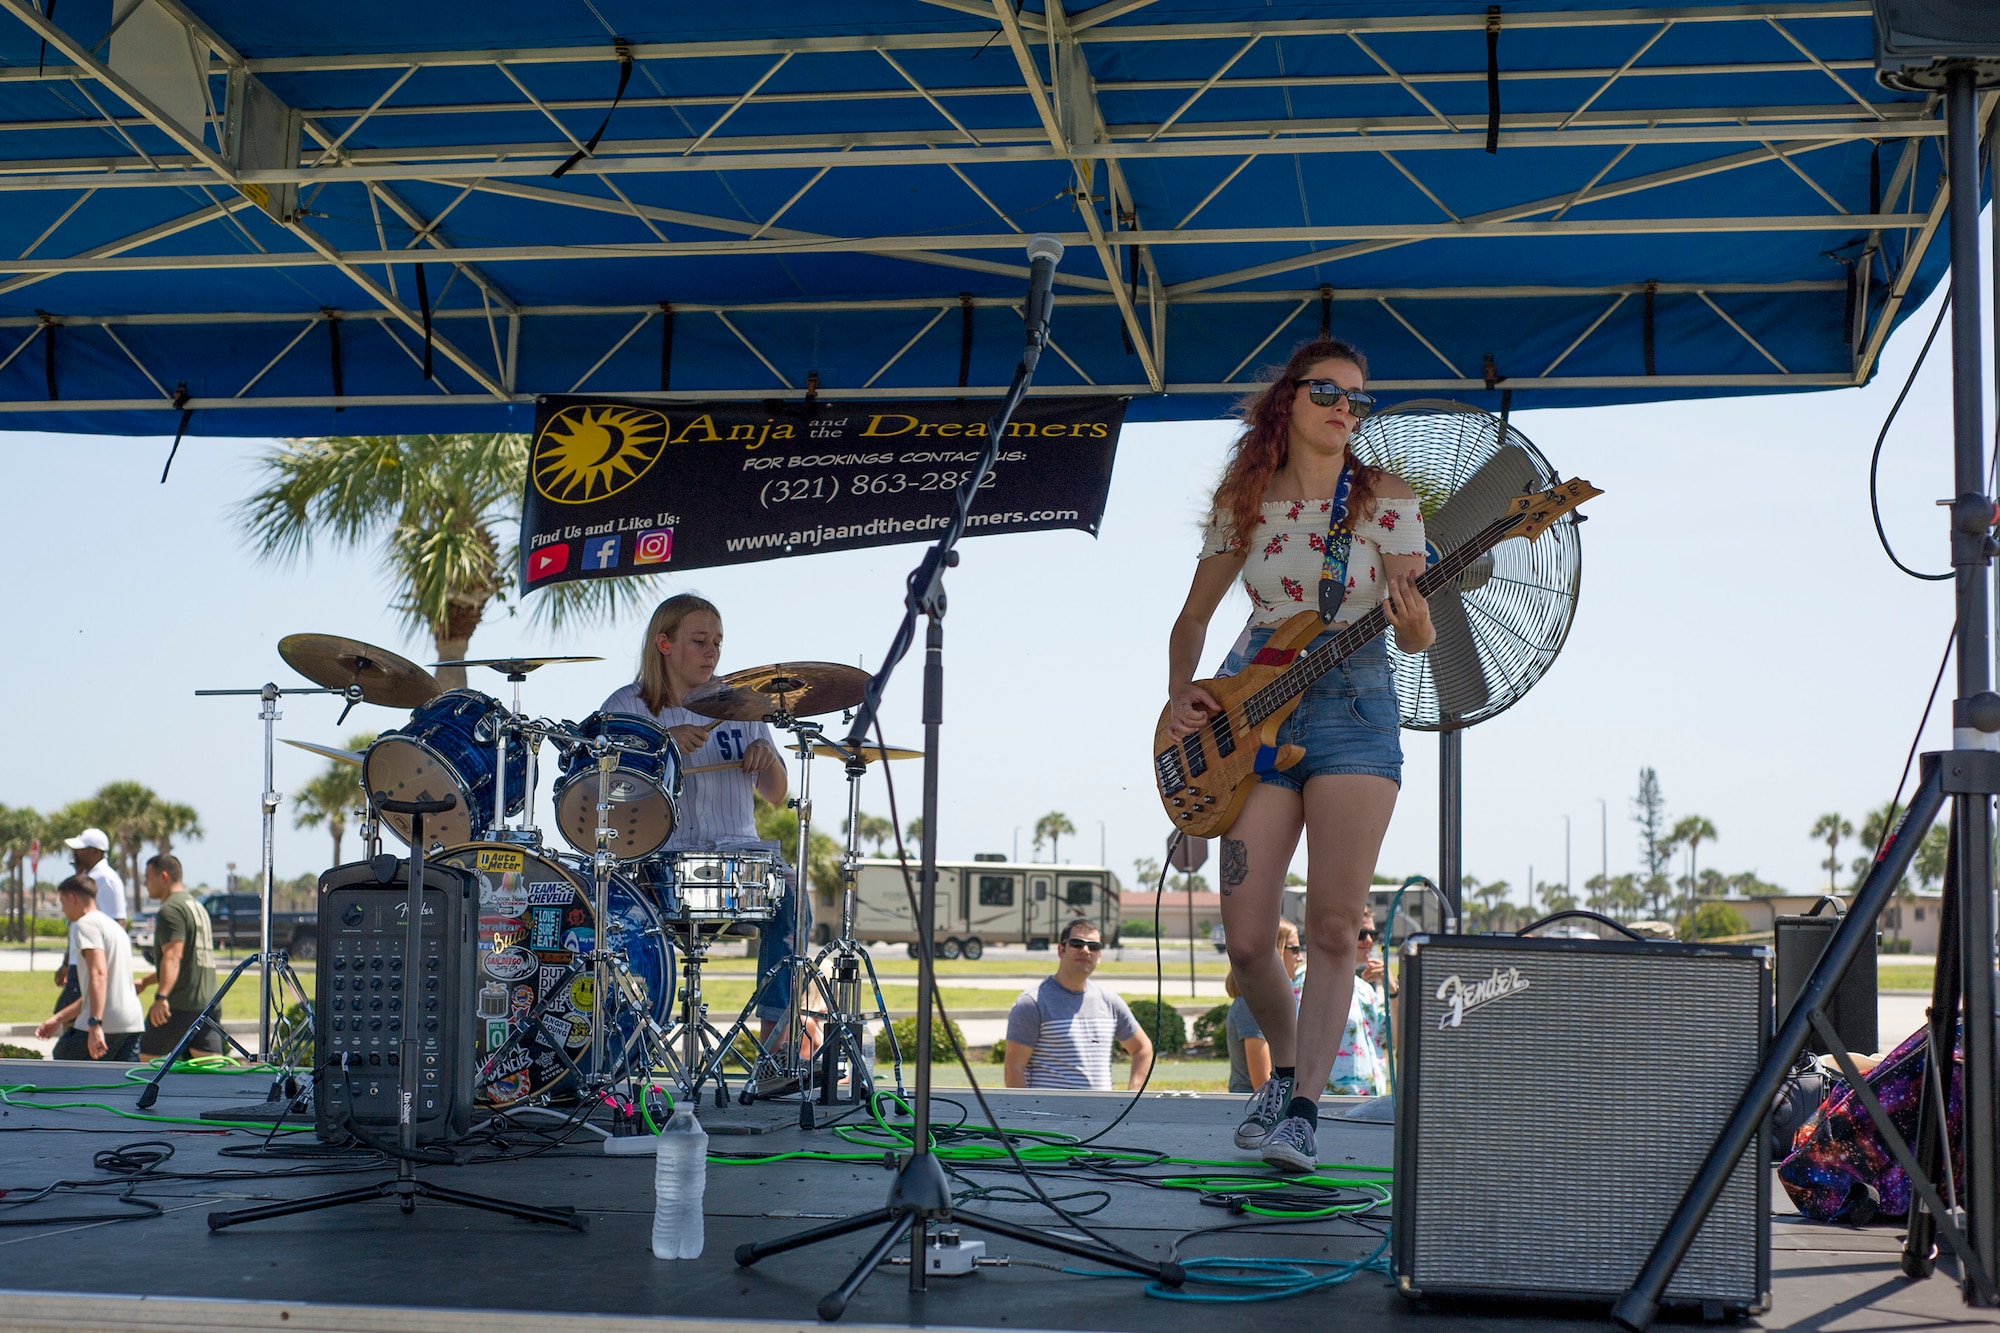 The 920th Rescue Wing held a biannual family day, at Patrick Air Force Base, Florida, Saturday, May 4, complete with food, games and live music. A local band, Anja and the Dreamer, provided live entertainment. (U.S. Air Force photo)